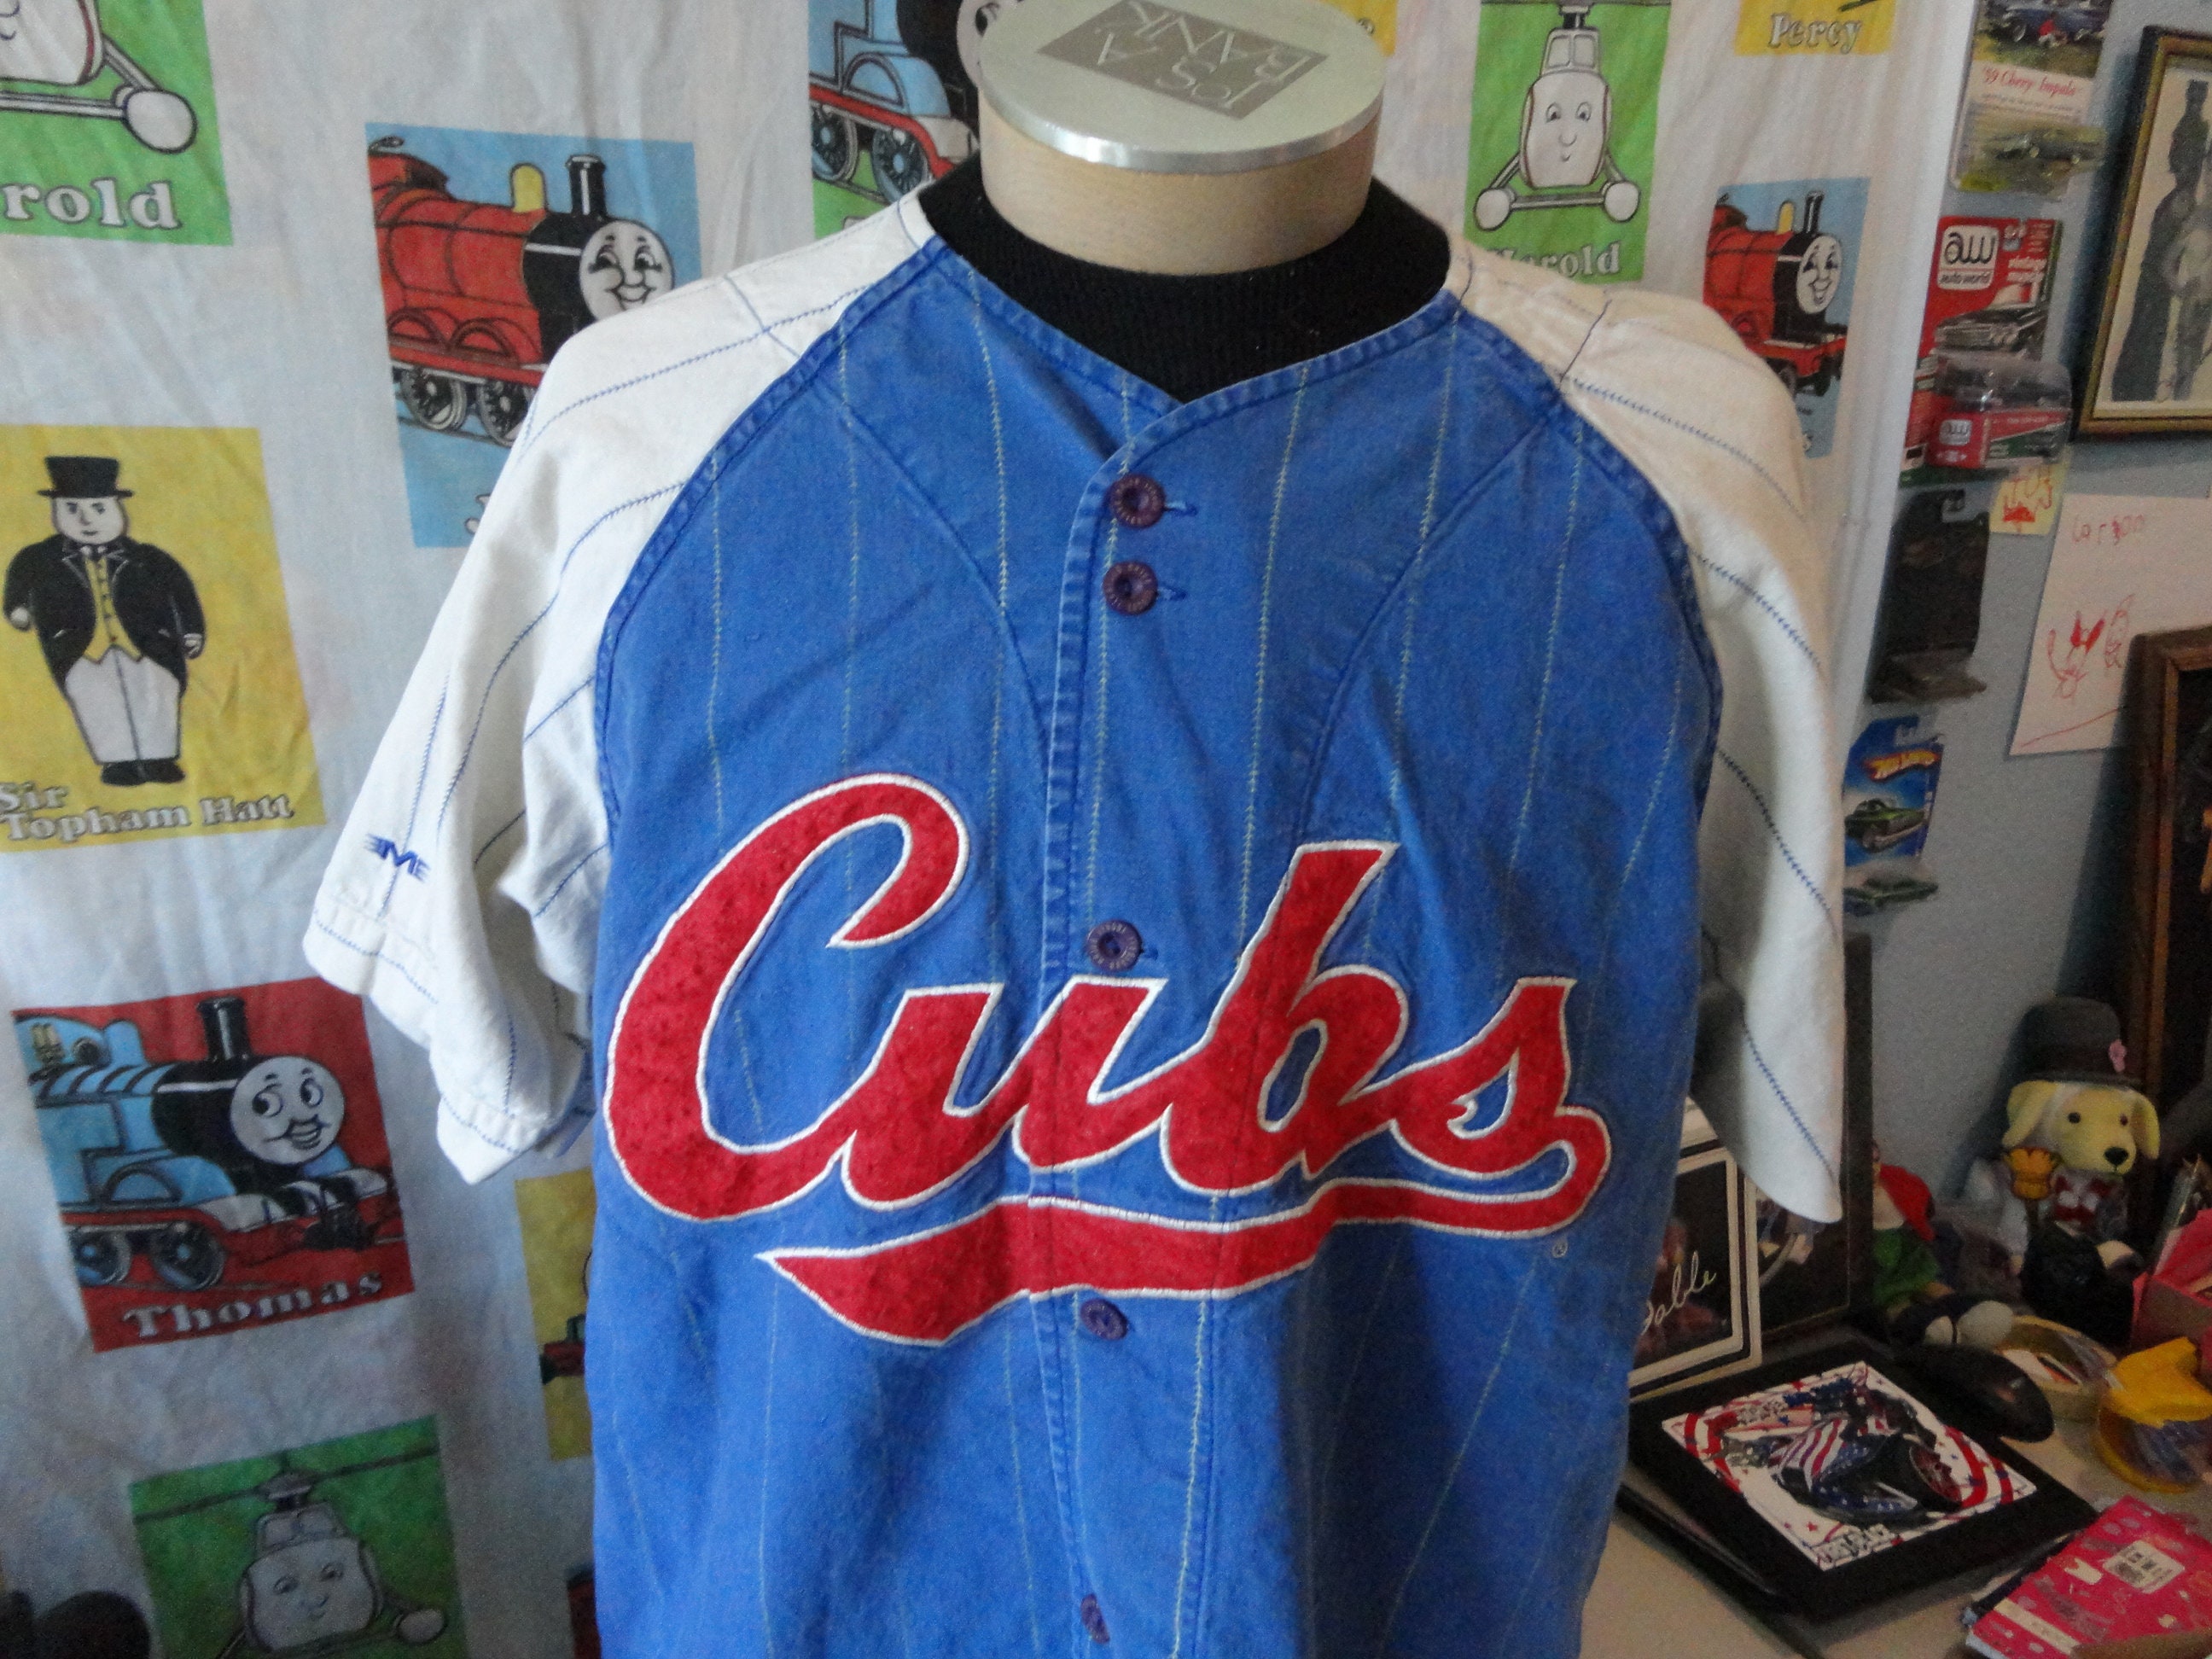 Chicago Cubs XXL Men's Majestic Jersey-Sammy Sosa- Cooperstown Collection